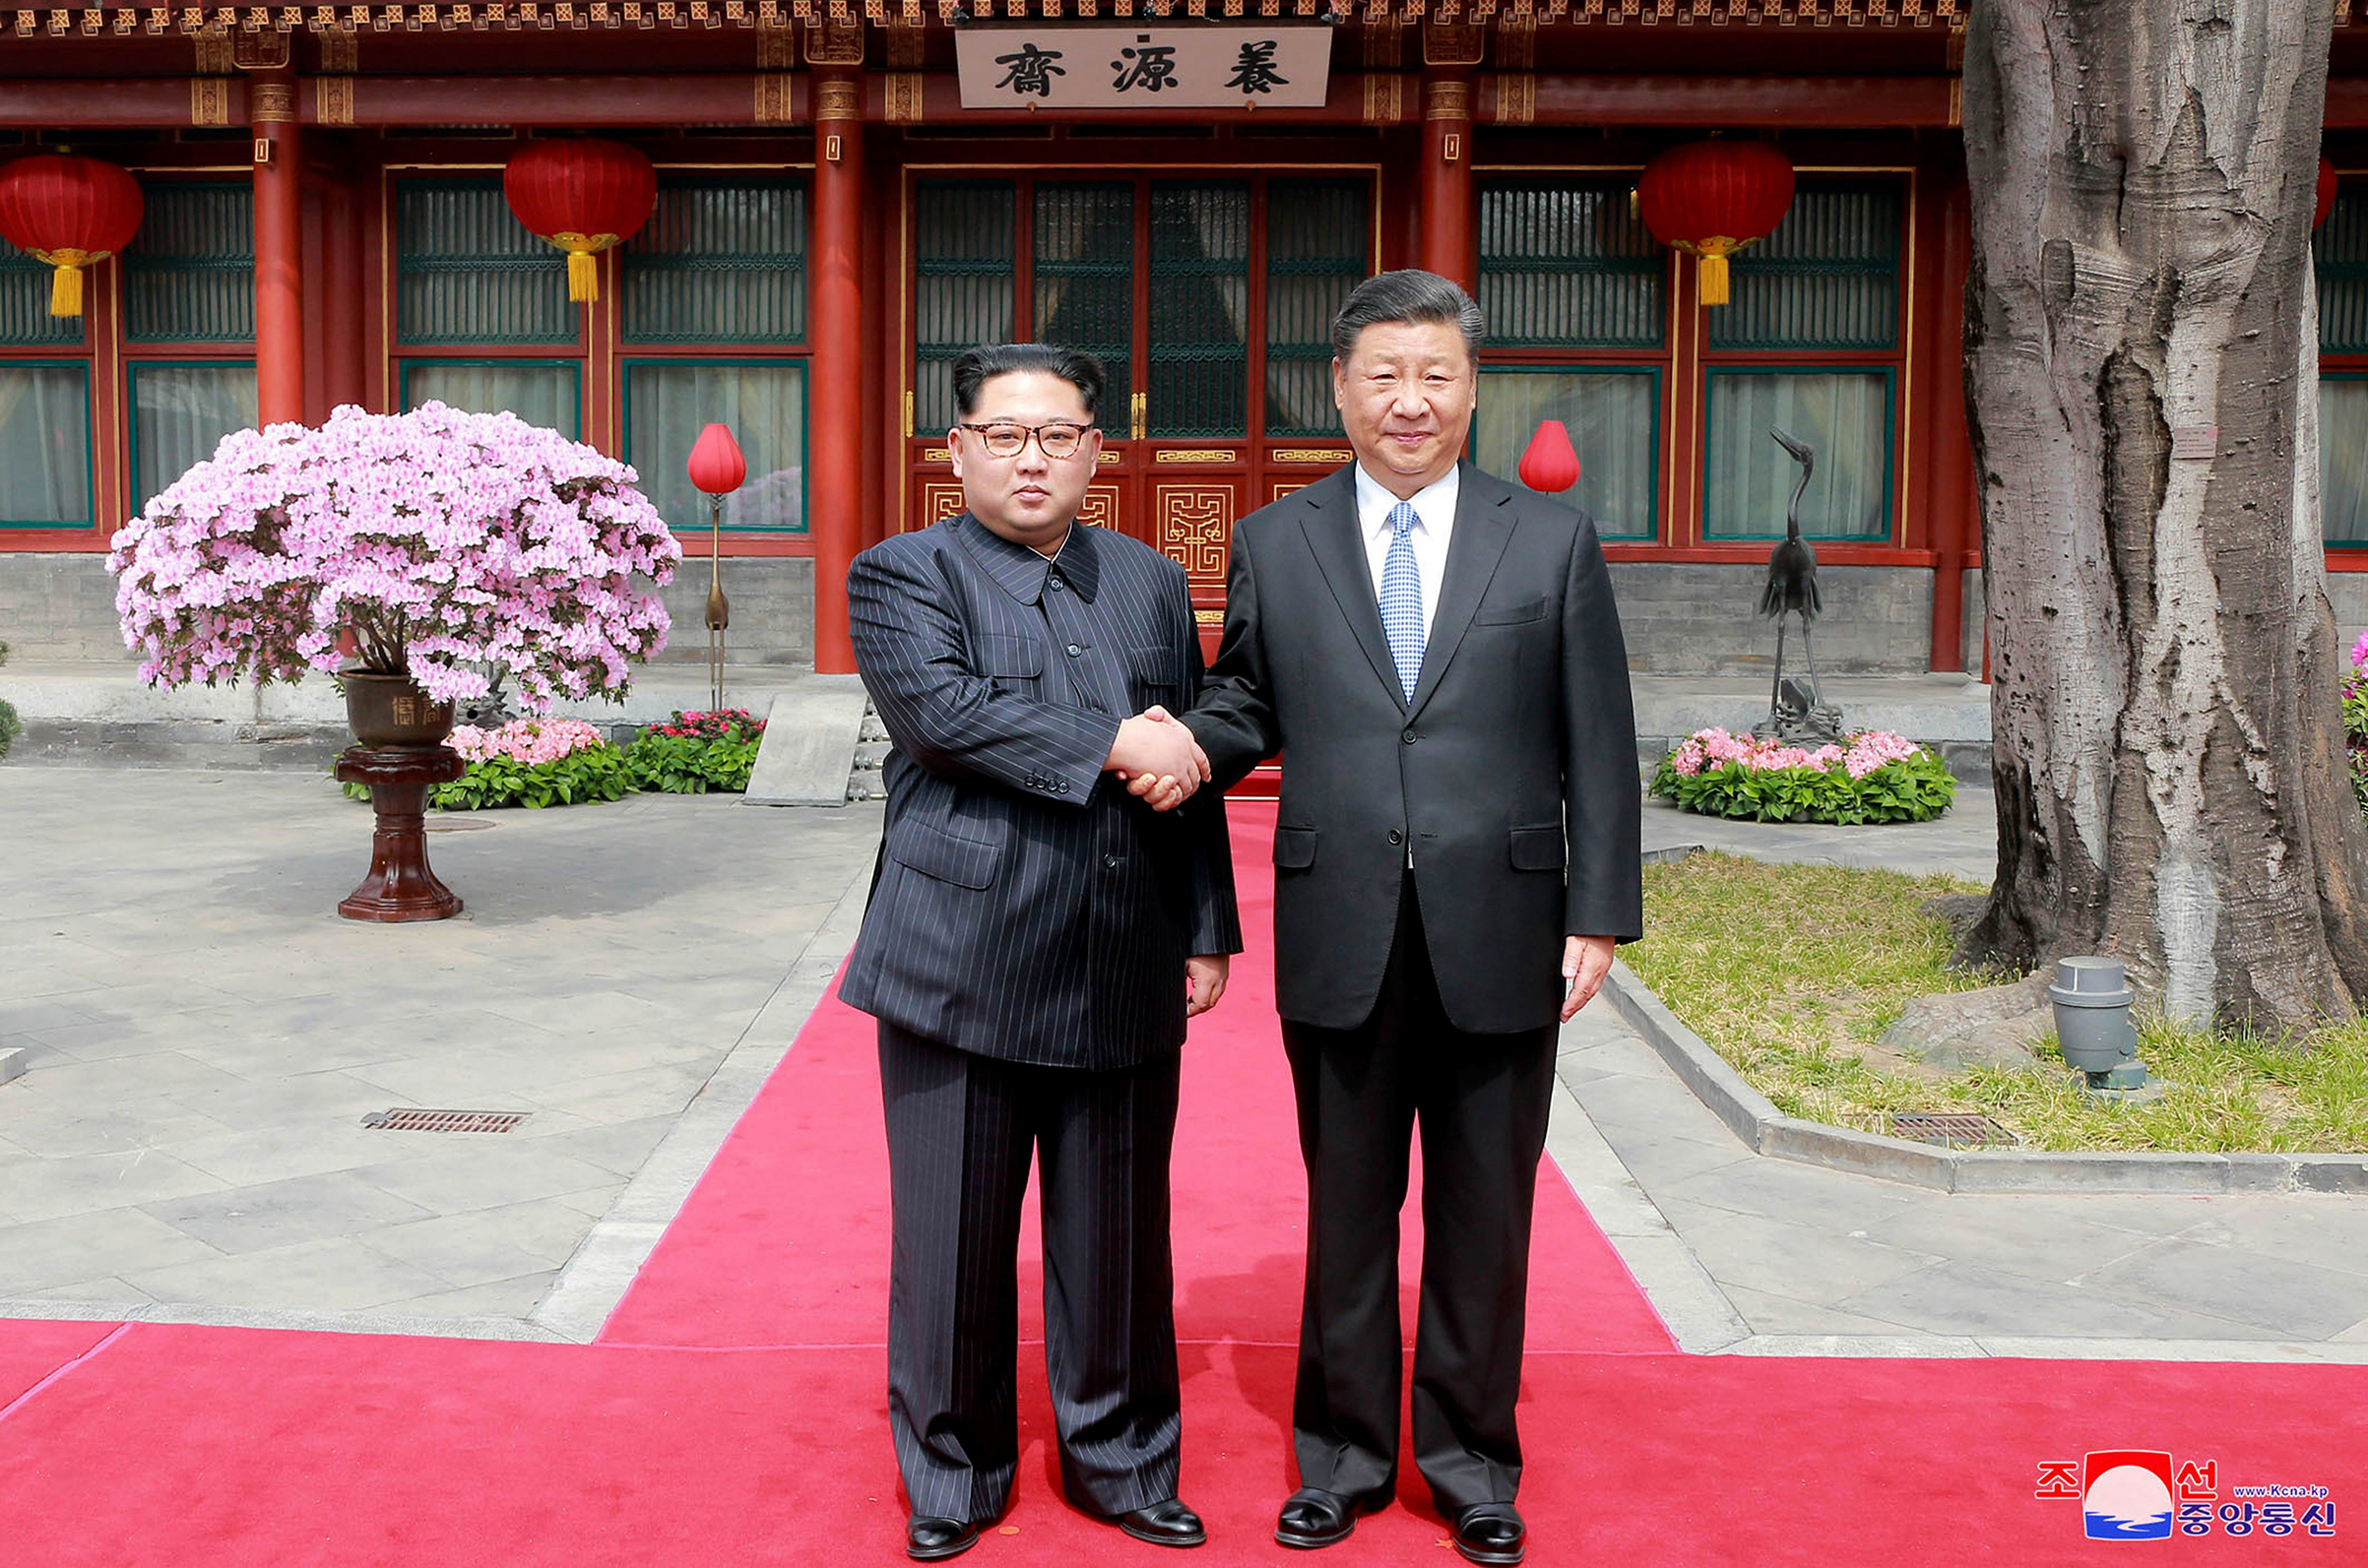 Kim and Xi shake hands at the Diaoyutai State Guesthouse on March 27; Kim waves from his armored train before departing Beijing following his surprise visit (KCNA/KNS/AP)